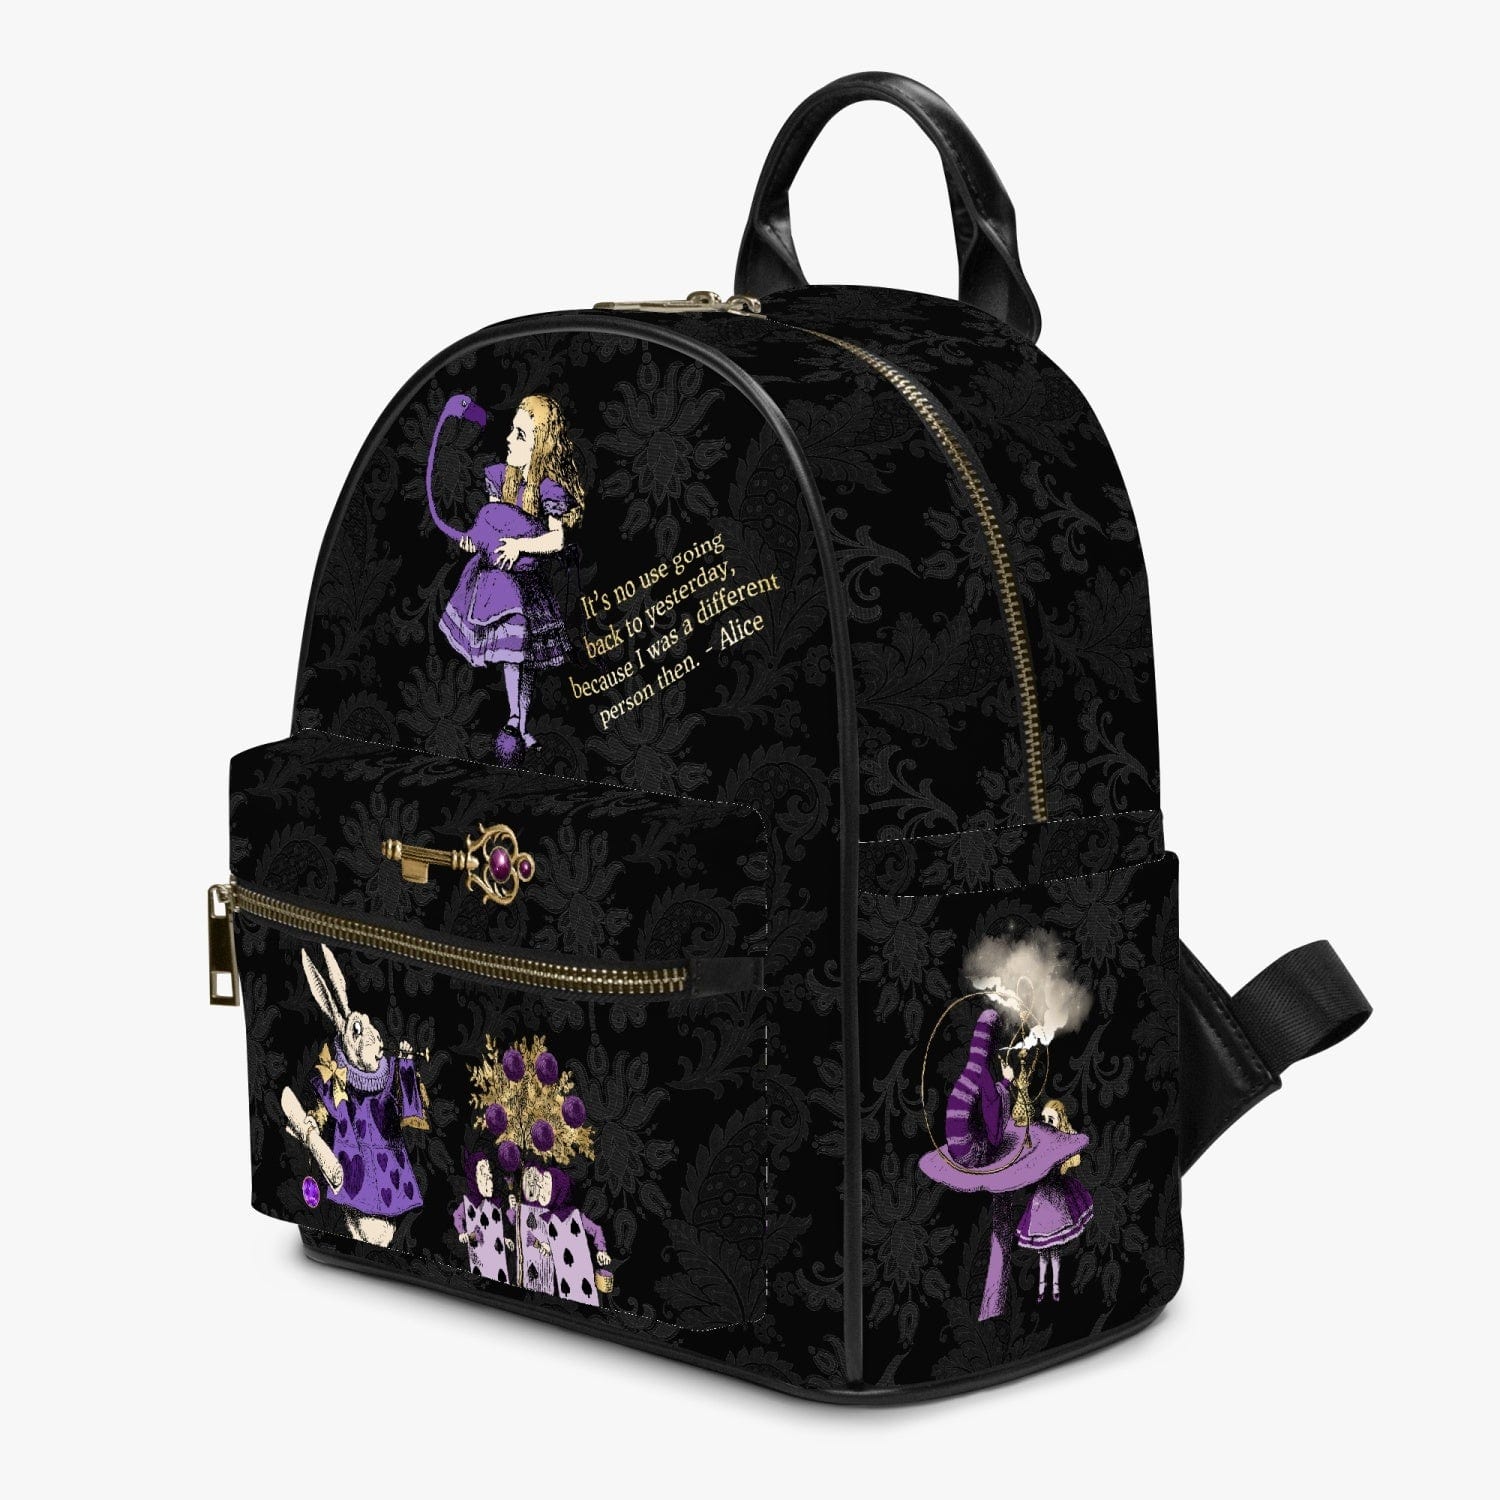 black damask patterned mini backpack featuring Alice in Wonderland characters in purples and lilacs with a famous Alice quote in gold